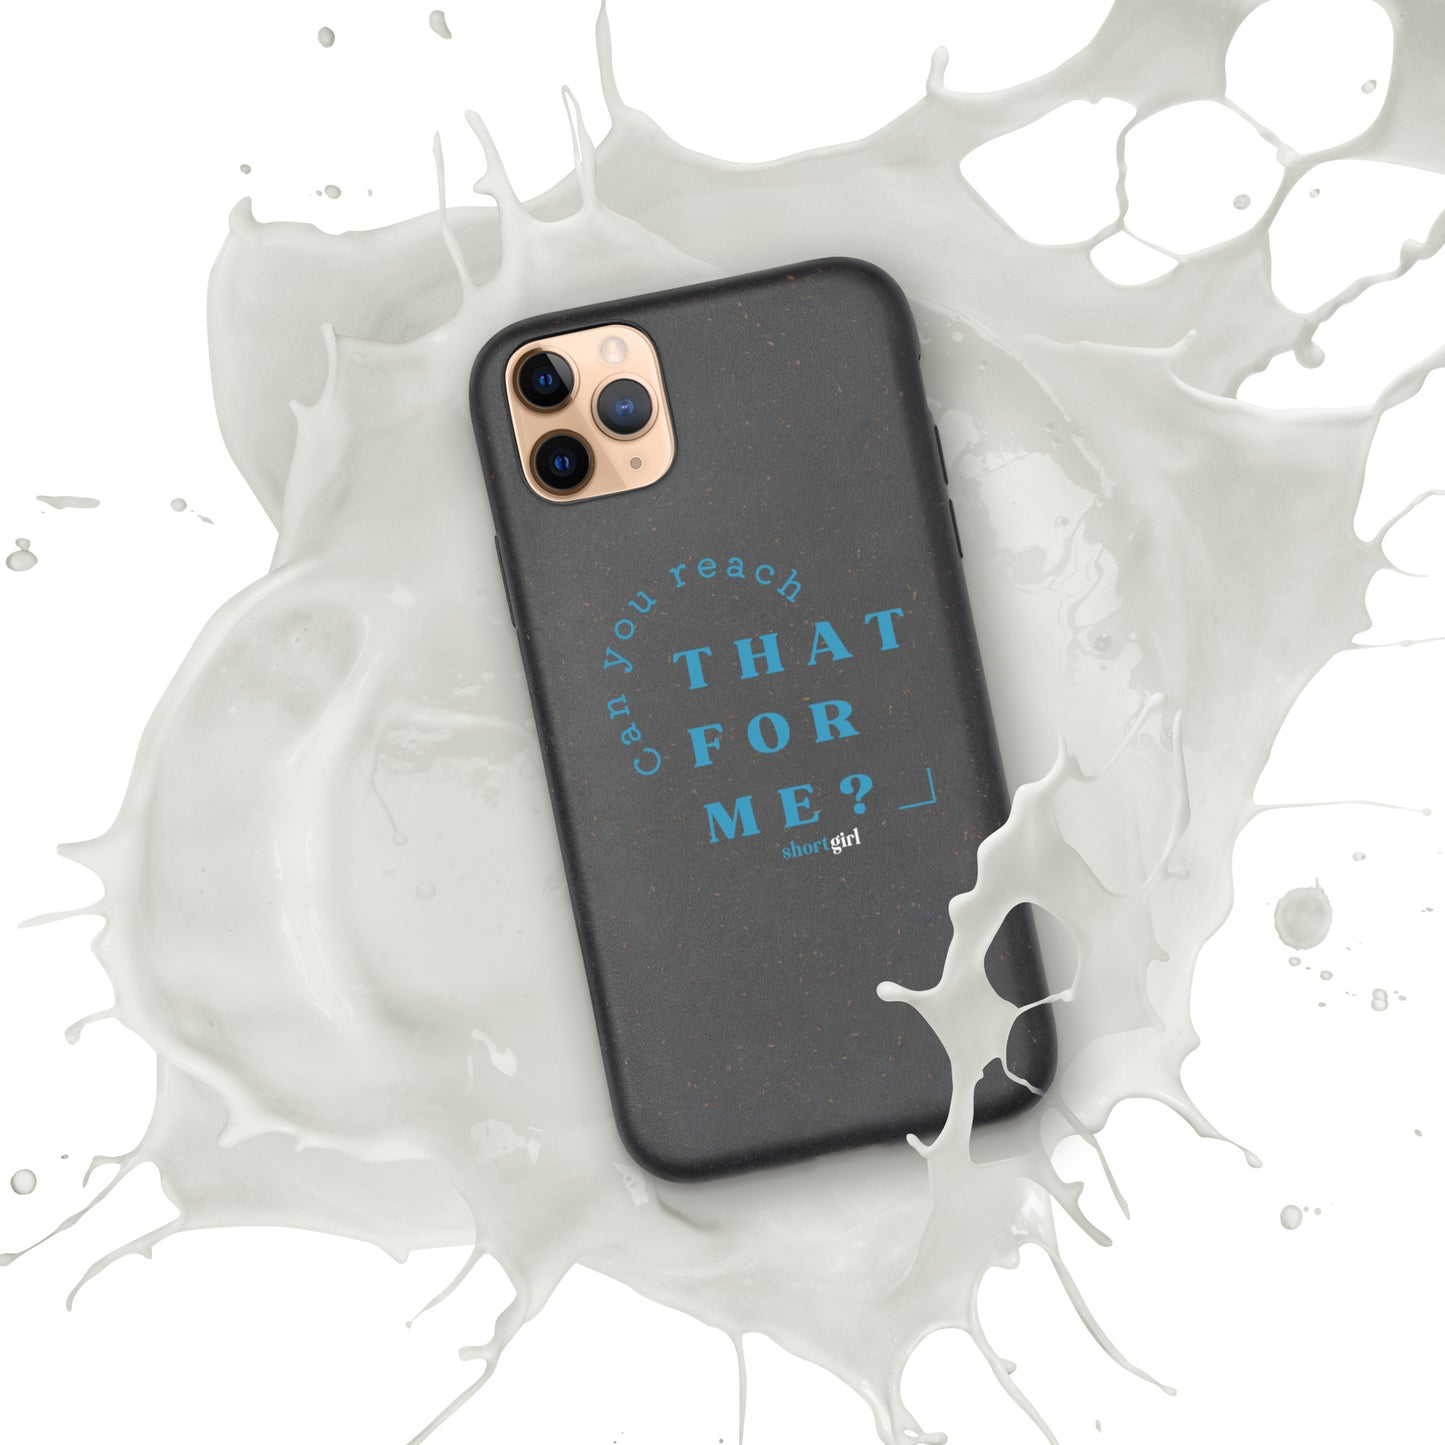 Speckled iPhone case - Can you reach that for me?